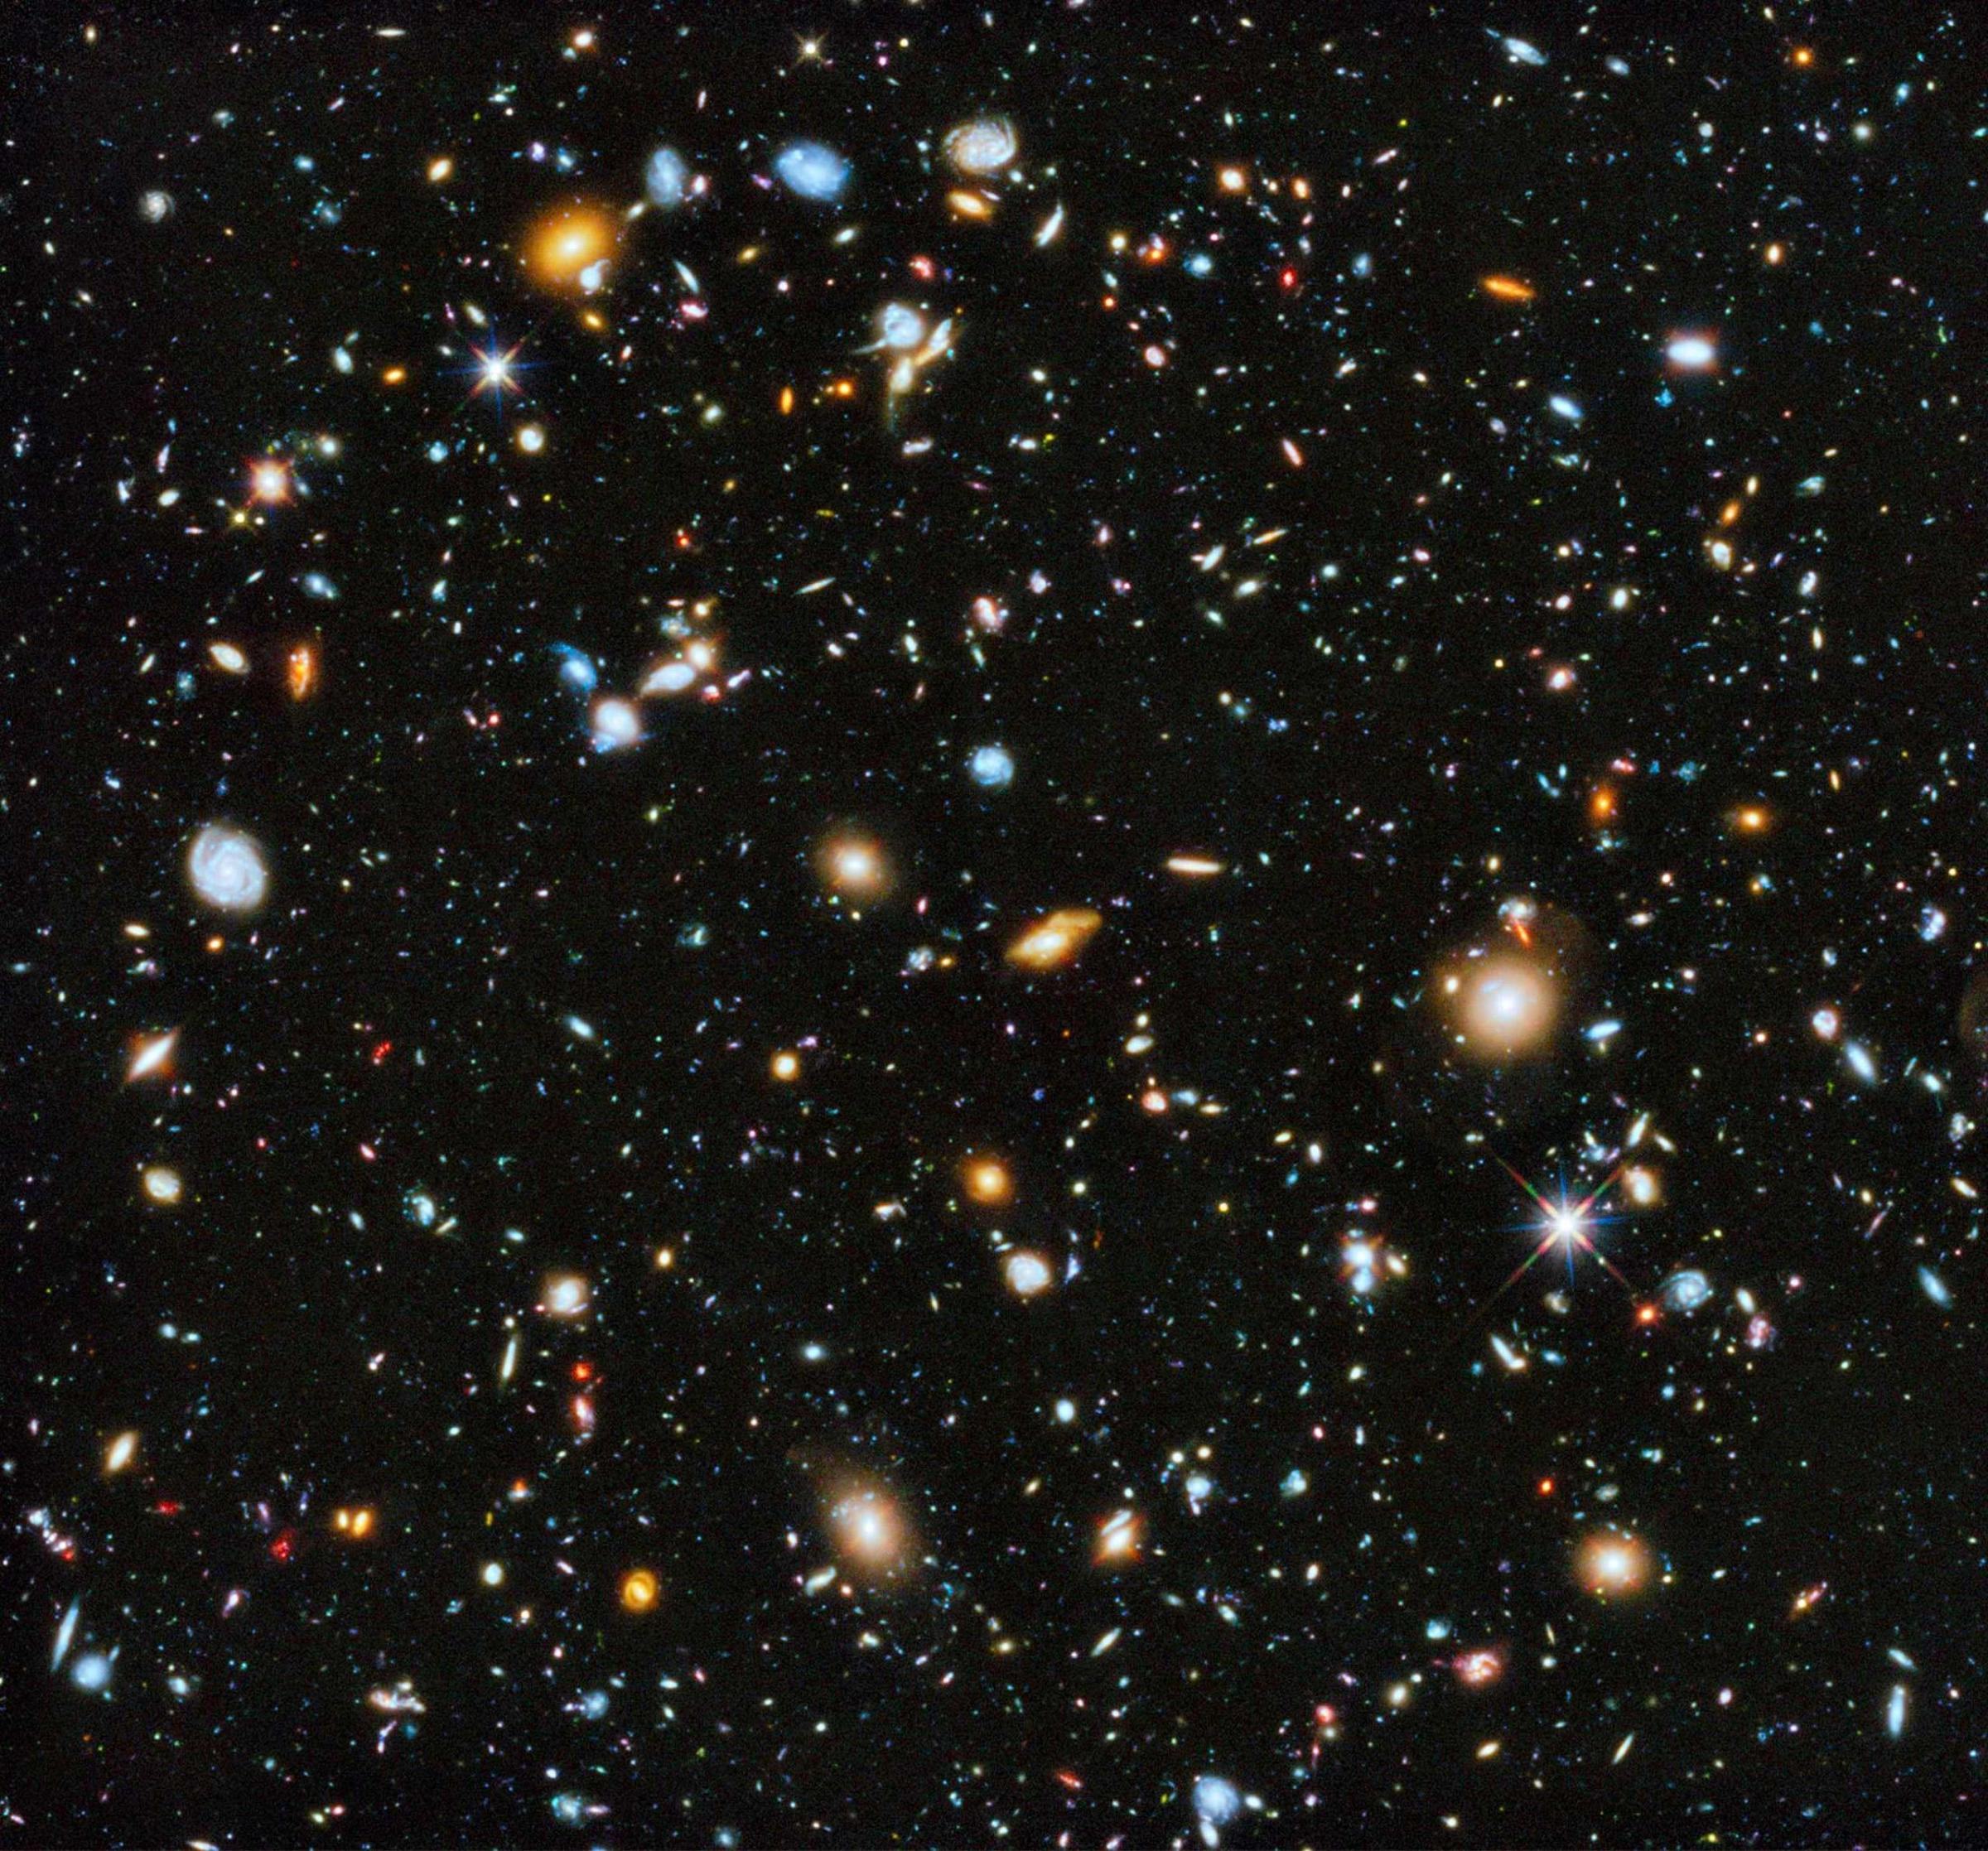 Handout of the evolving universe is shown in this composite of separate exposures taken in 2003 to 2012 with Hubble's Advanced Camera for Surveys and Wide Field Camera 3